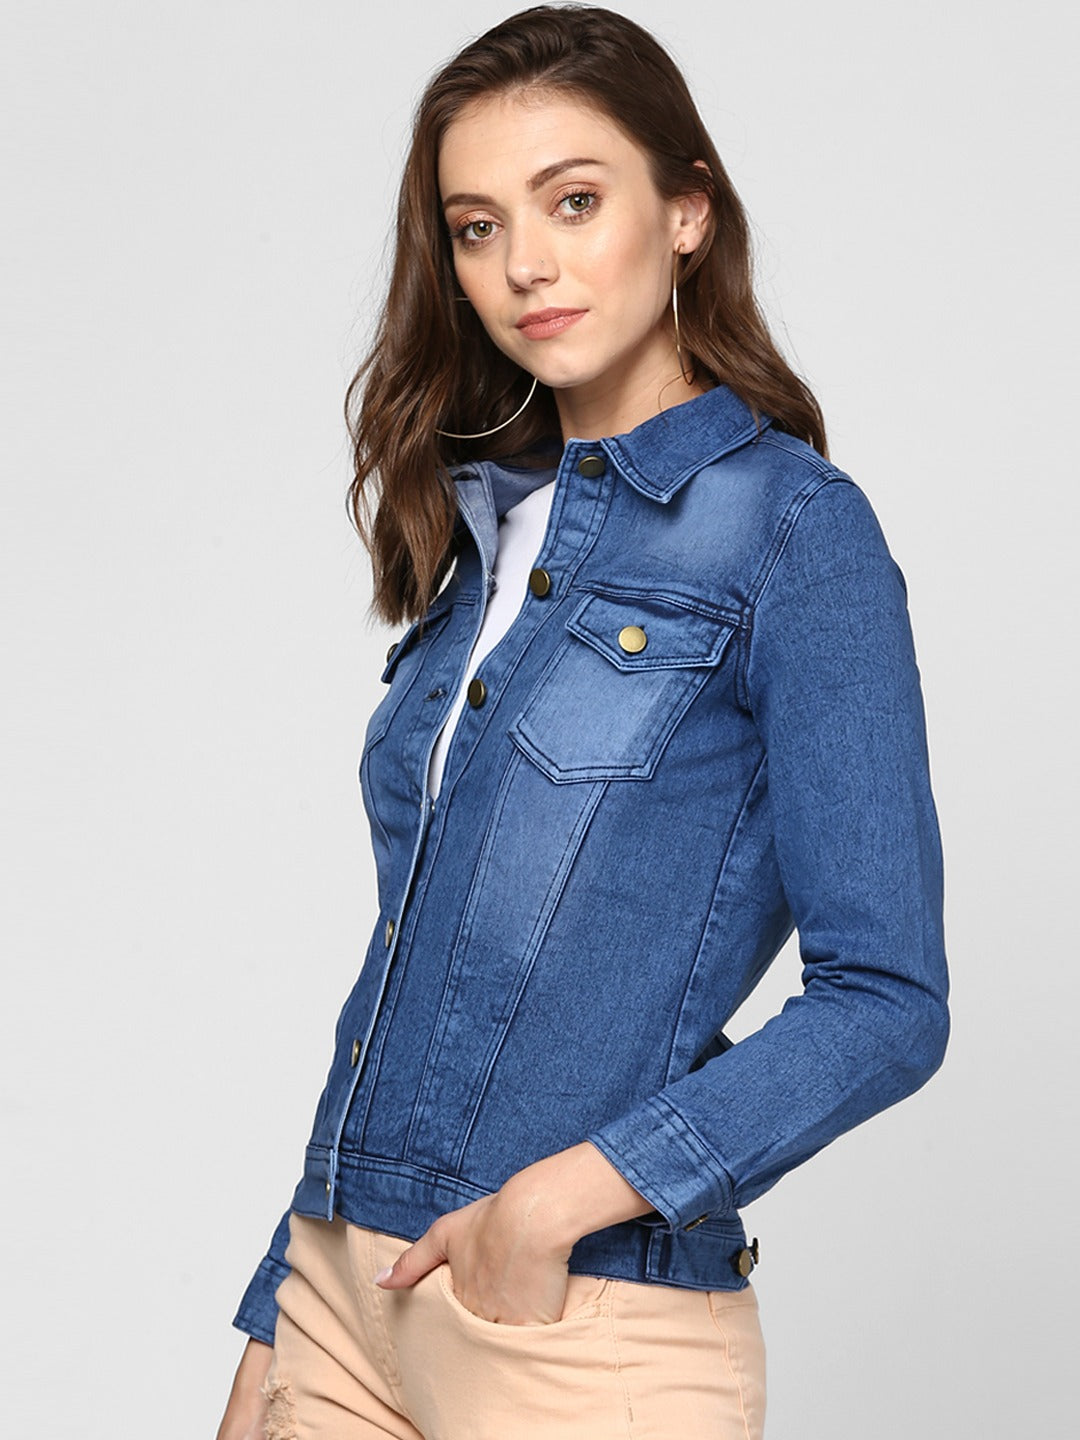 Stylish women's blue denim jacket with pockets, buttons, and collar for a trendy casual look.